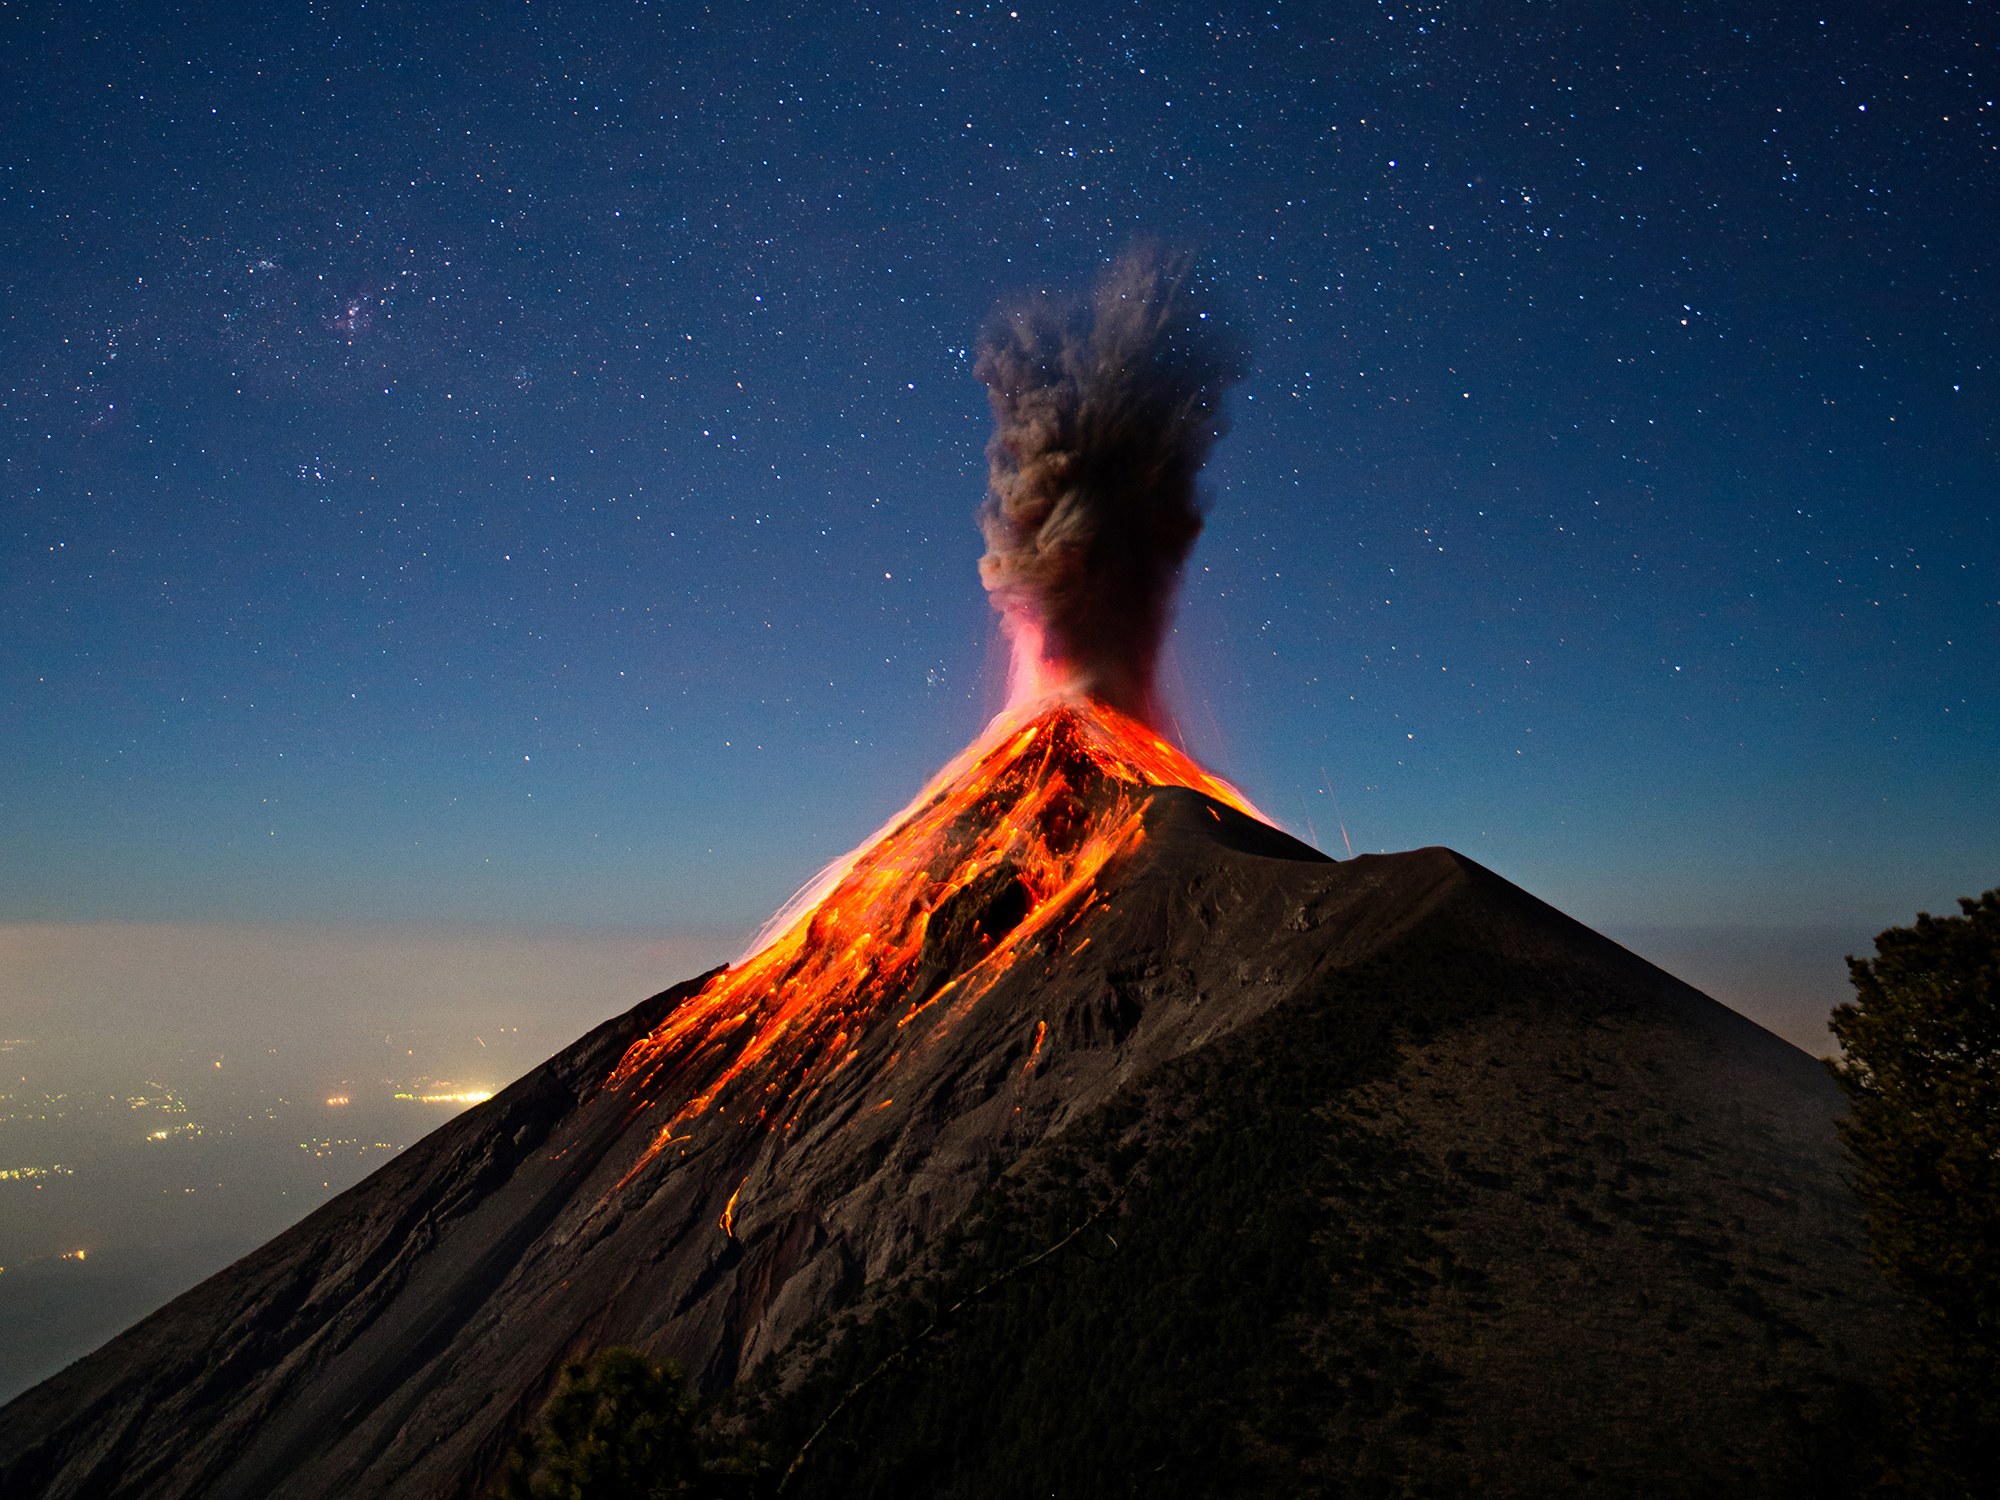 Central American Volcanoes Let Out Spectacular Eruptions | WIRED